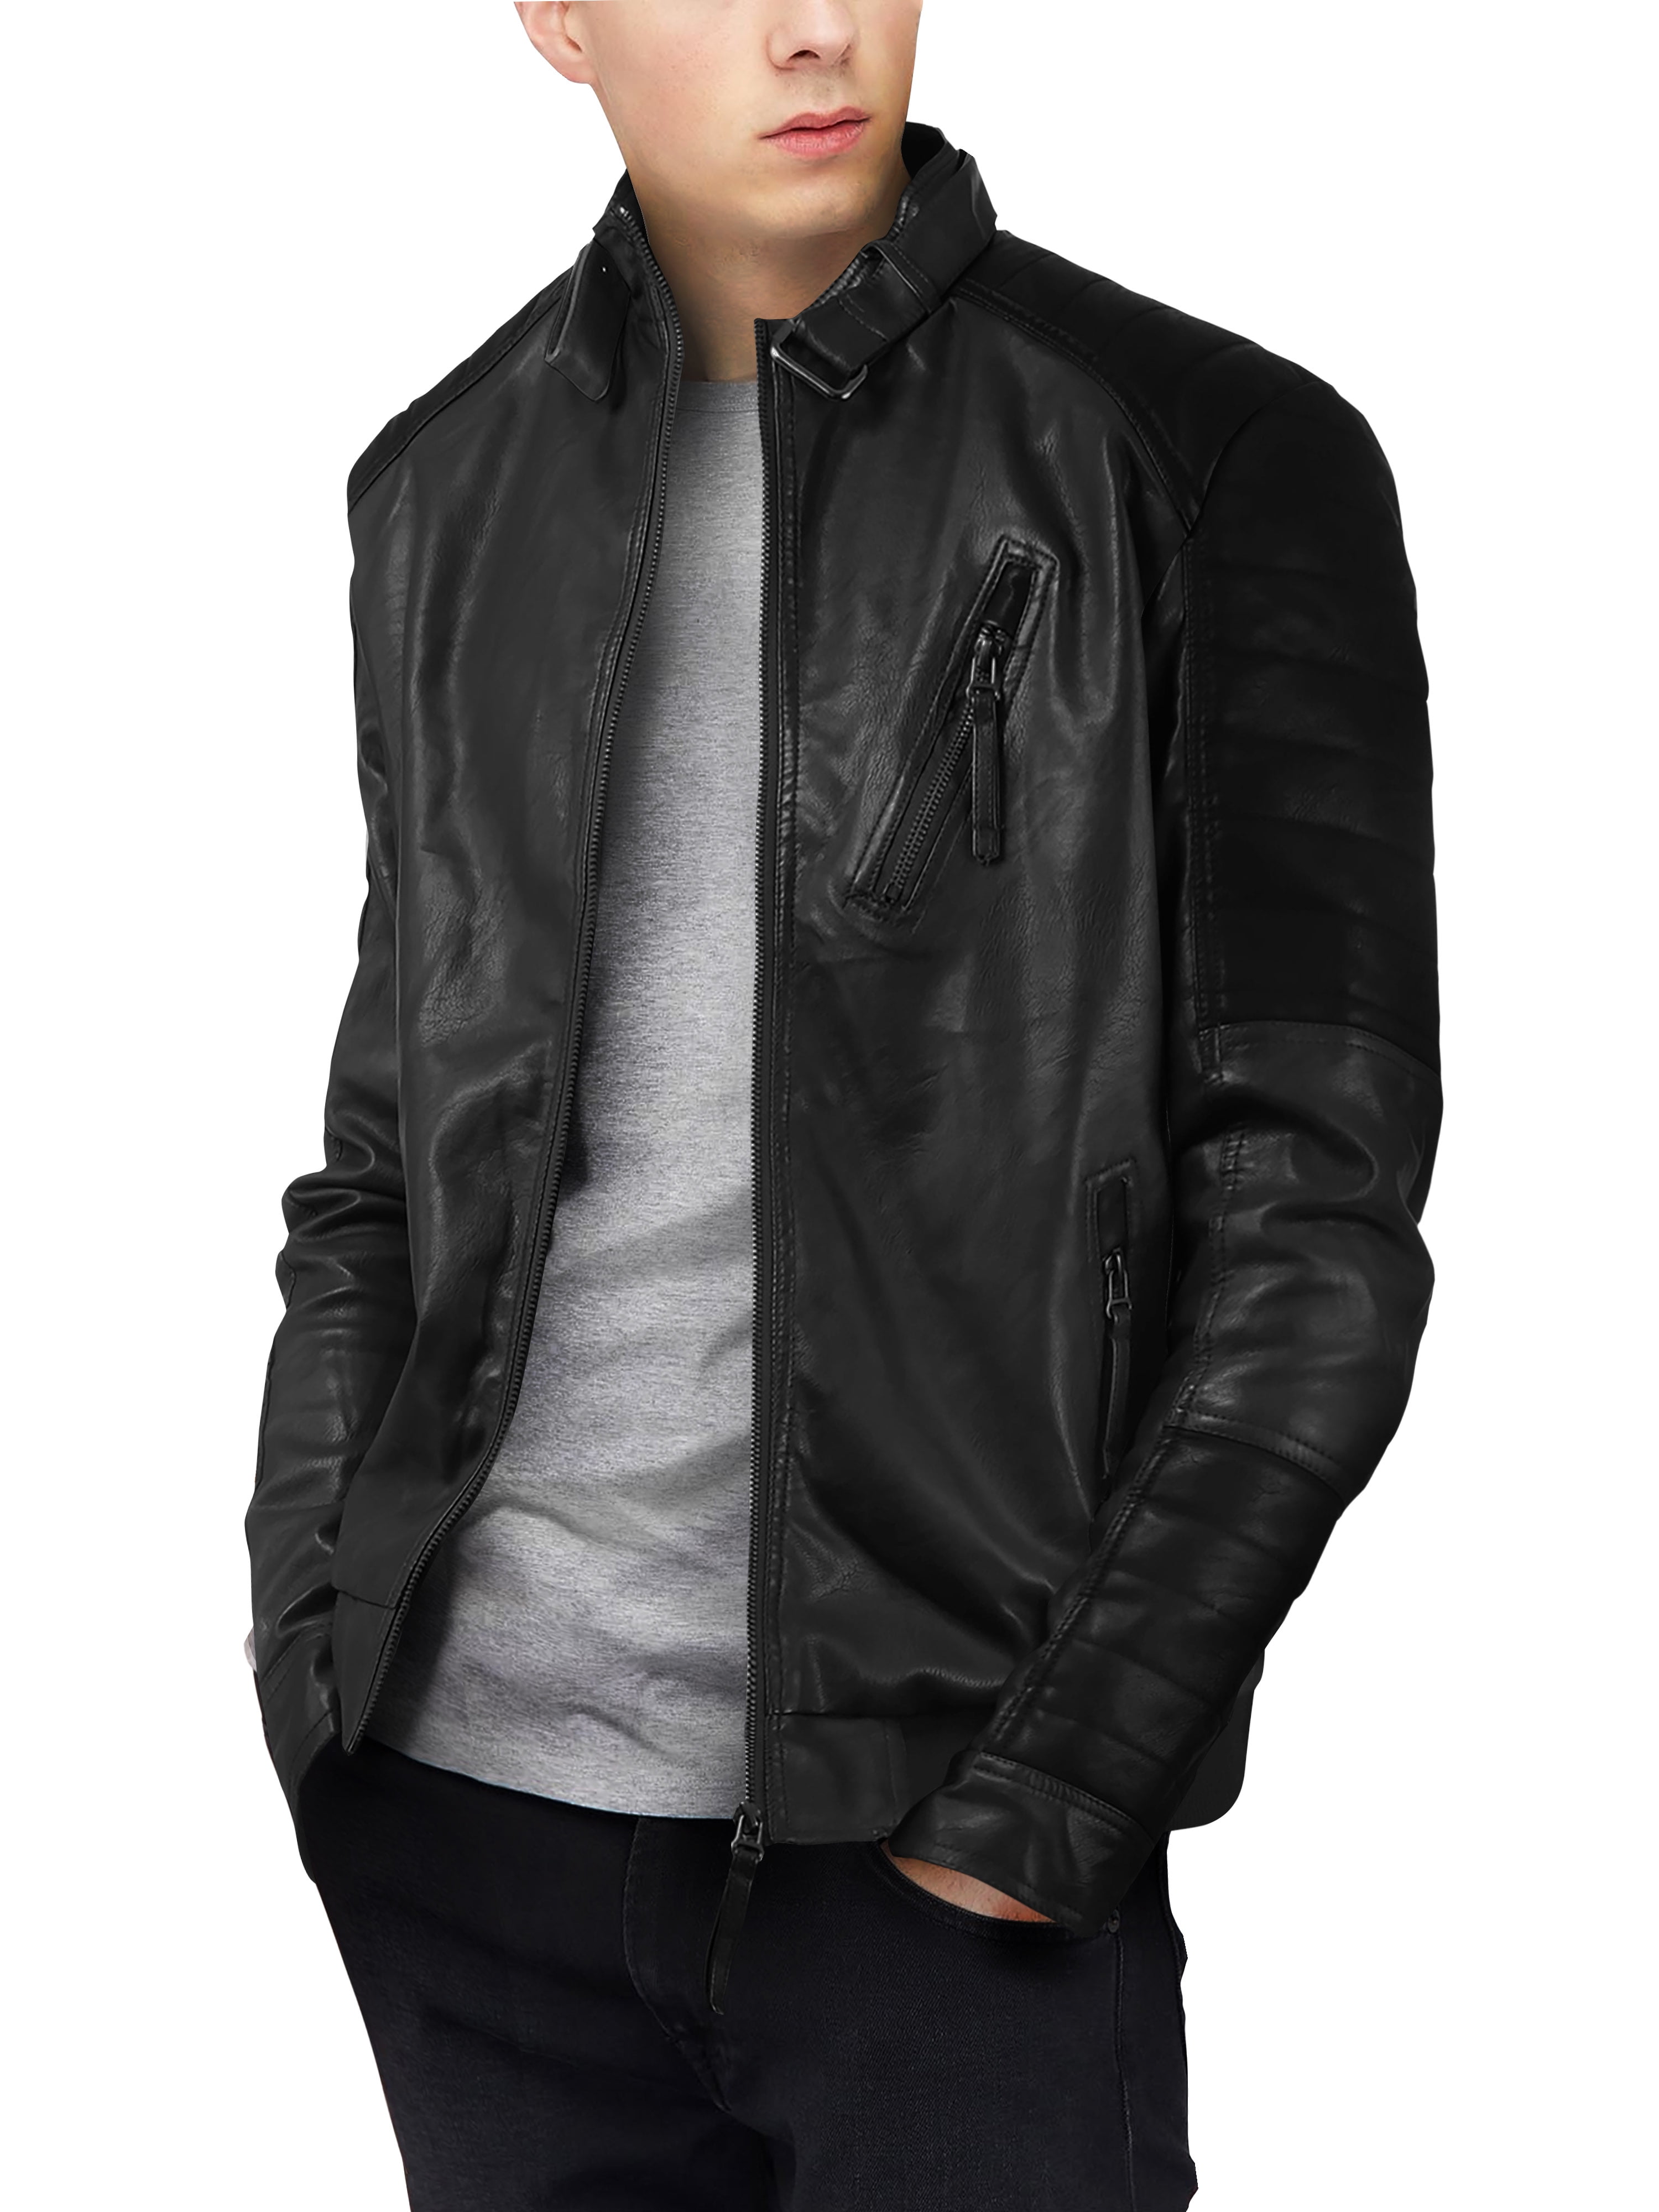 Hat and Beyond Mens Motorcycle Rider Jacket Faux Leather with Tactical  Pockets 